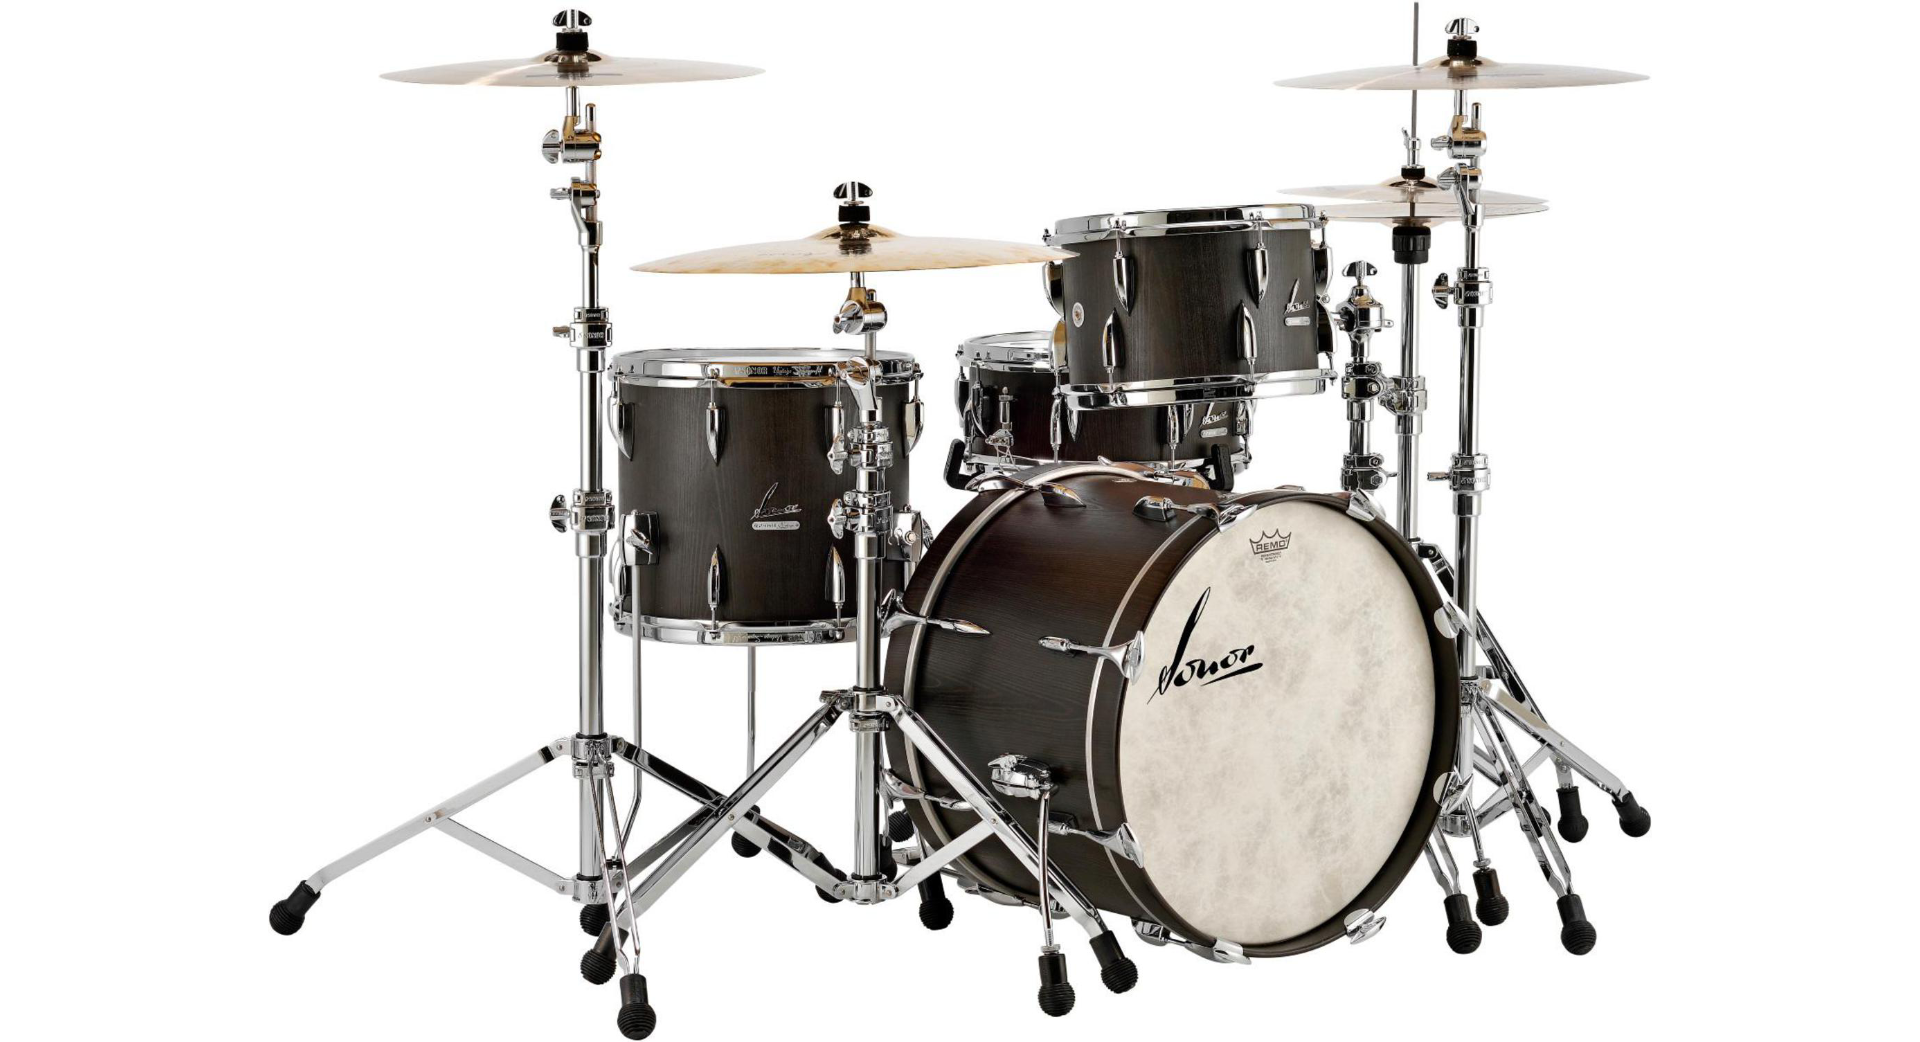 Sonor Vintage Series 3-Piece Shell Pack - Vintage Onyx